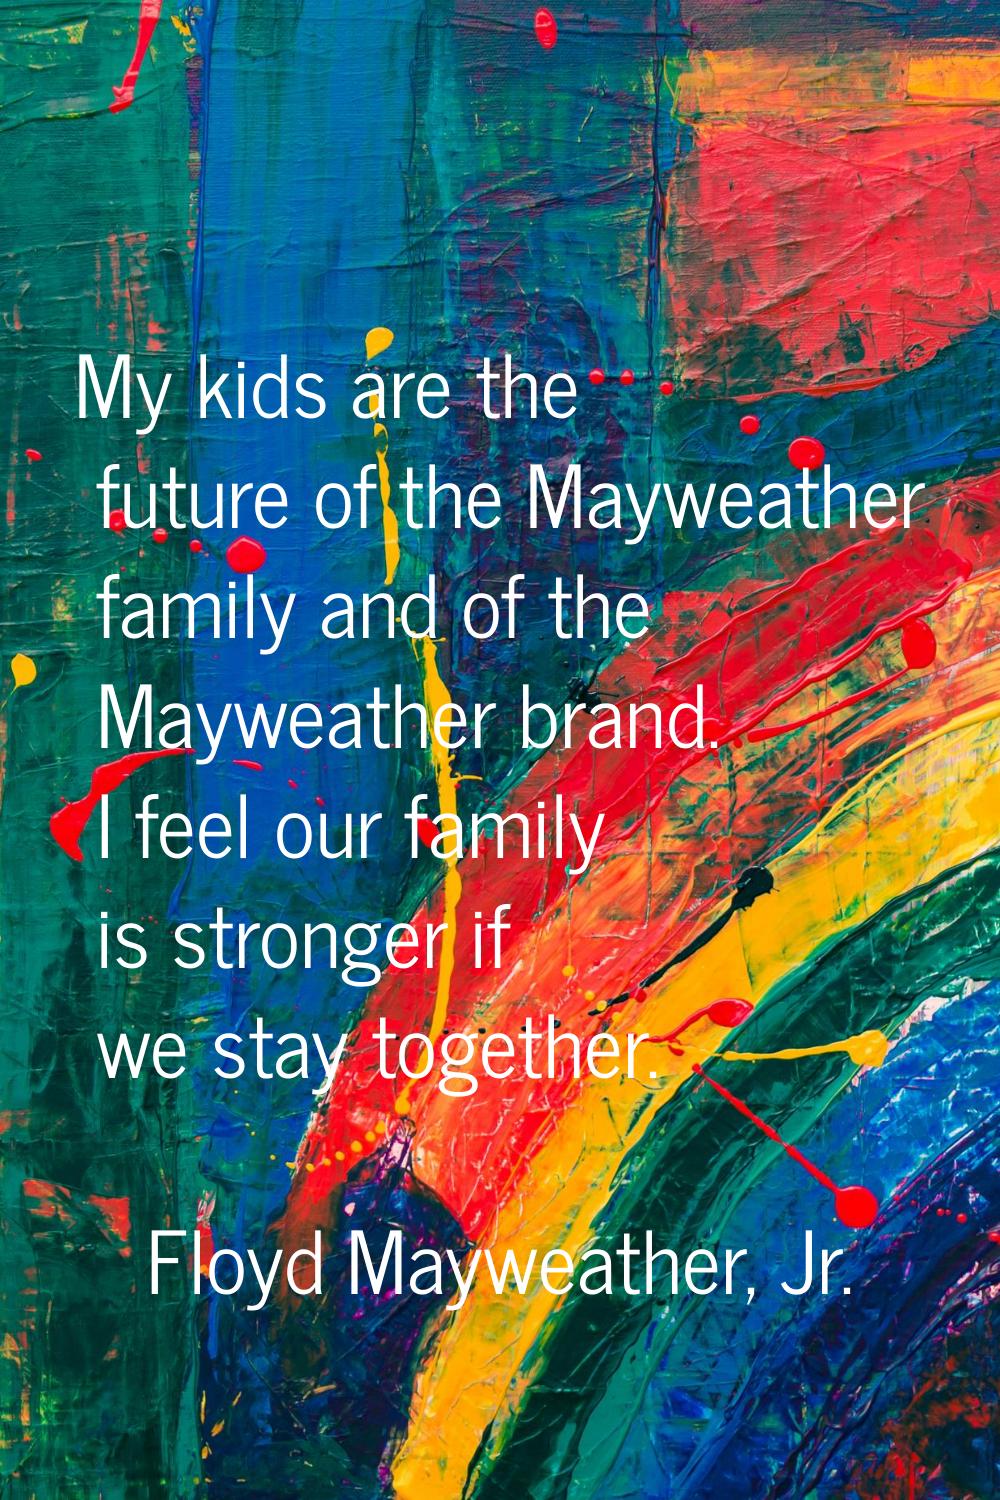 My kids are the future of the Mayweather family and of the Mayweather brand. I feel our family is s